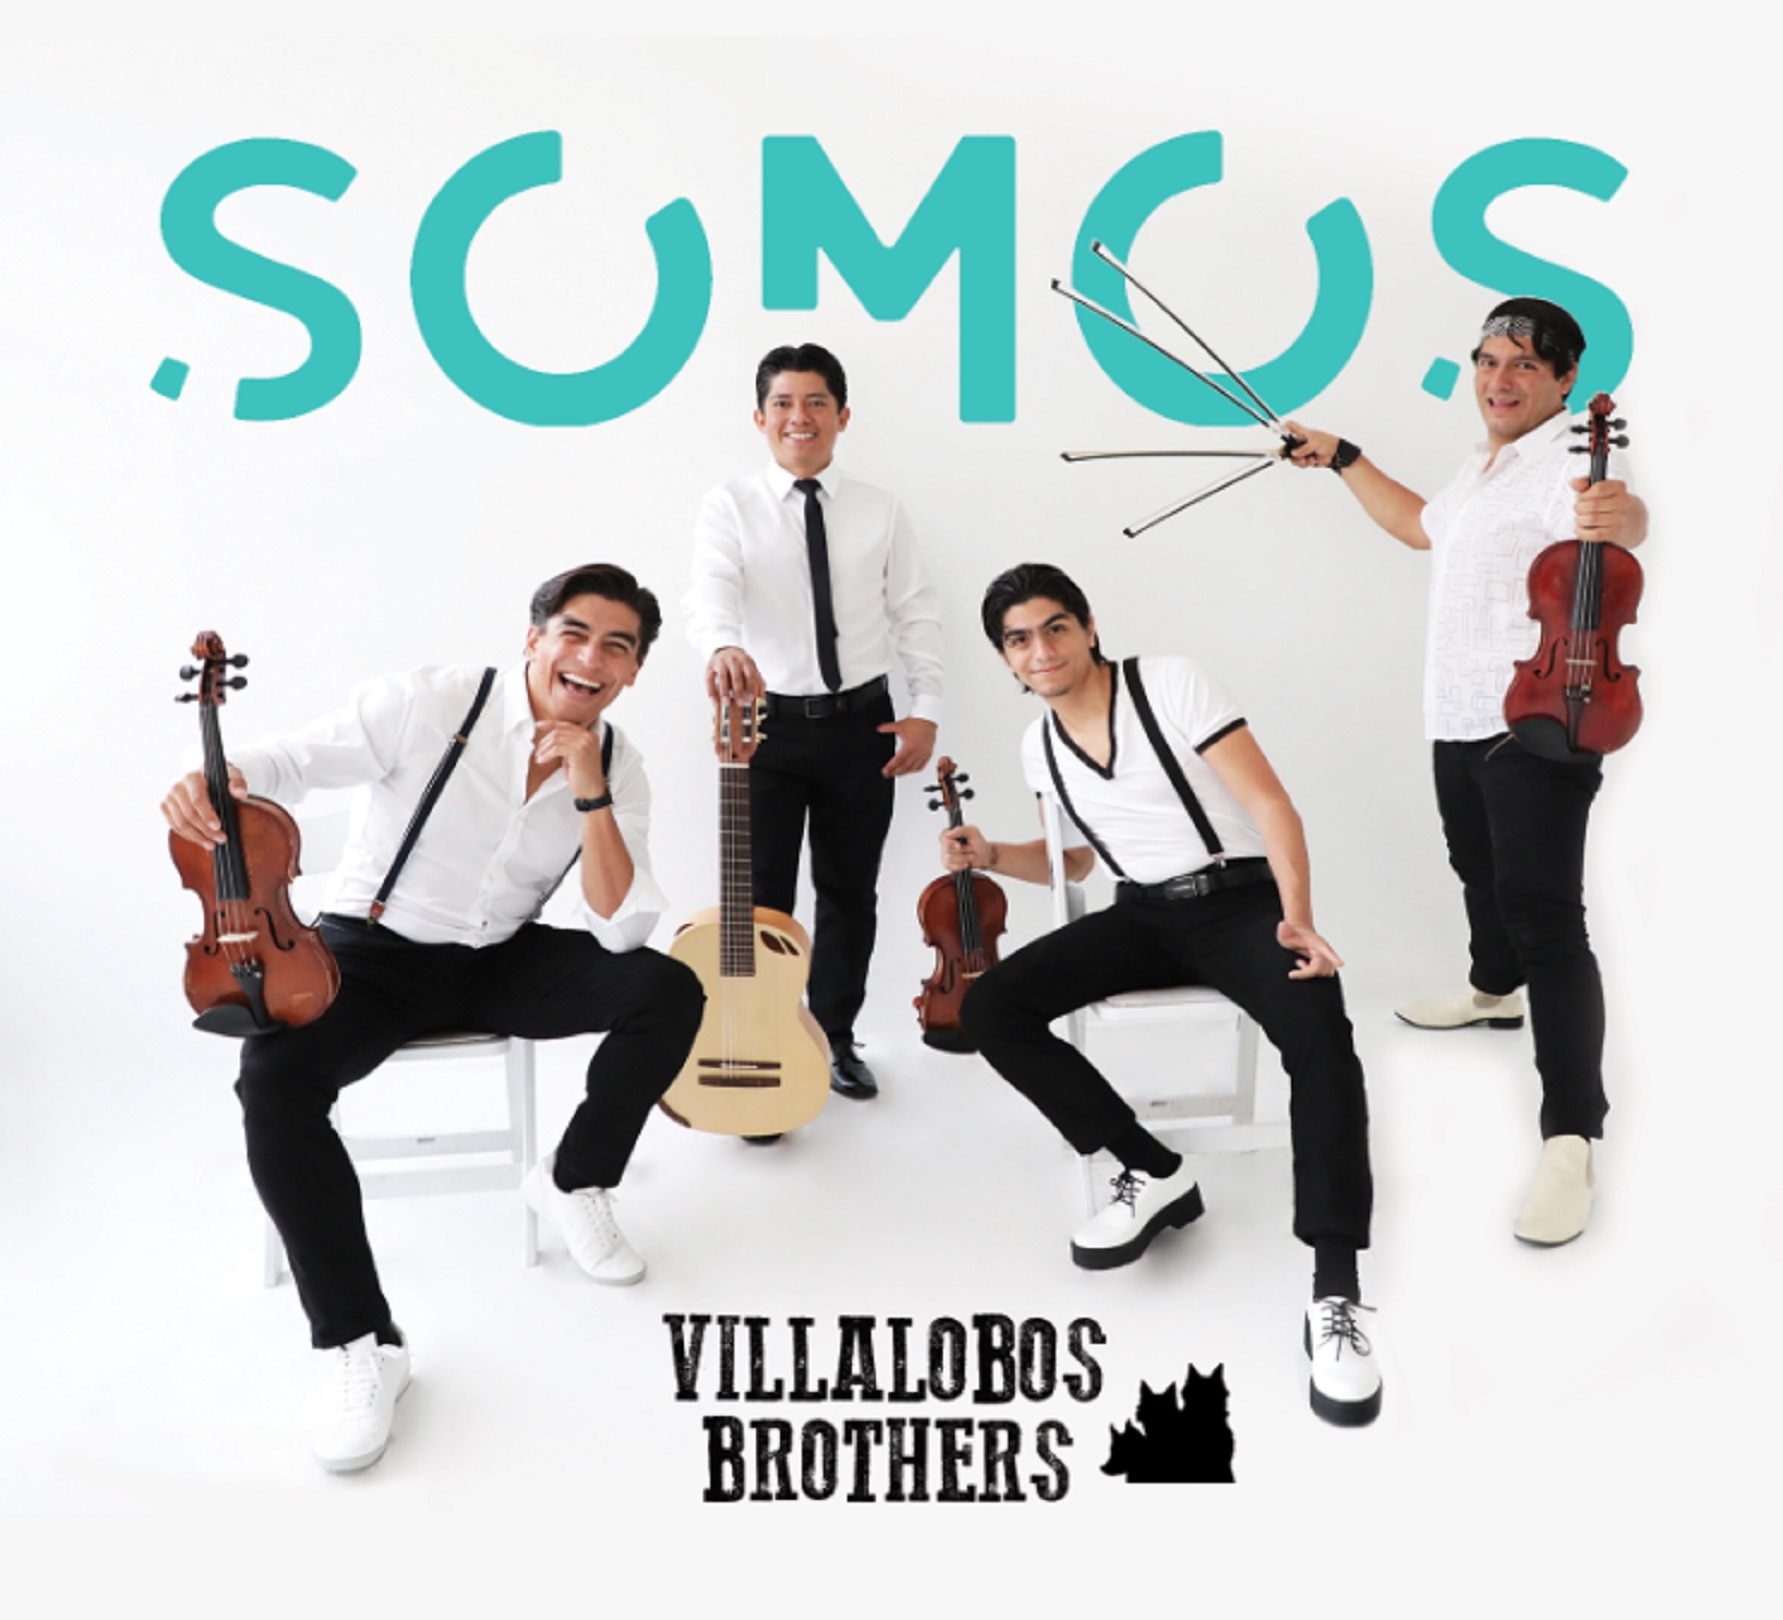 Villalobos Brothers charge their virtuoso violins with eclectic energy on Somos